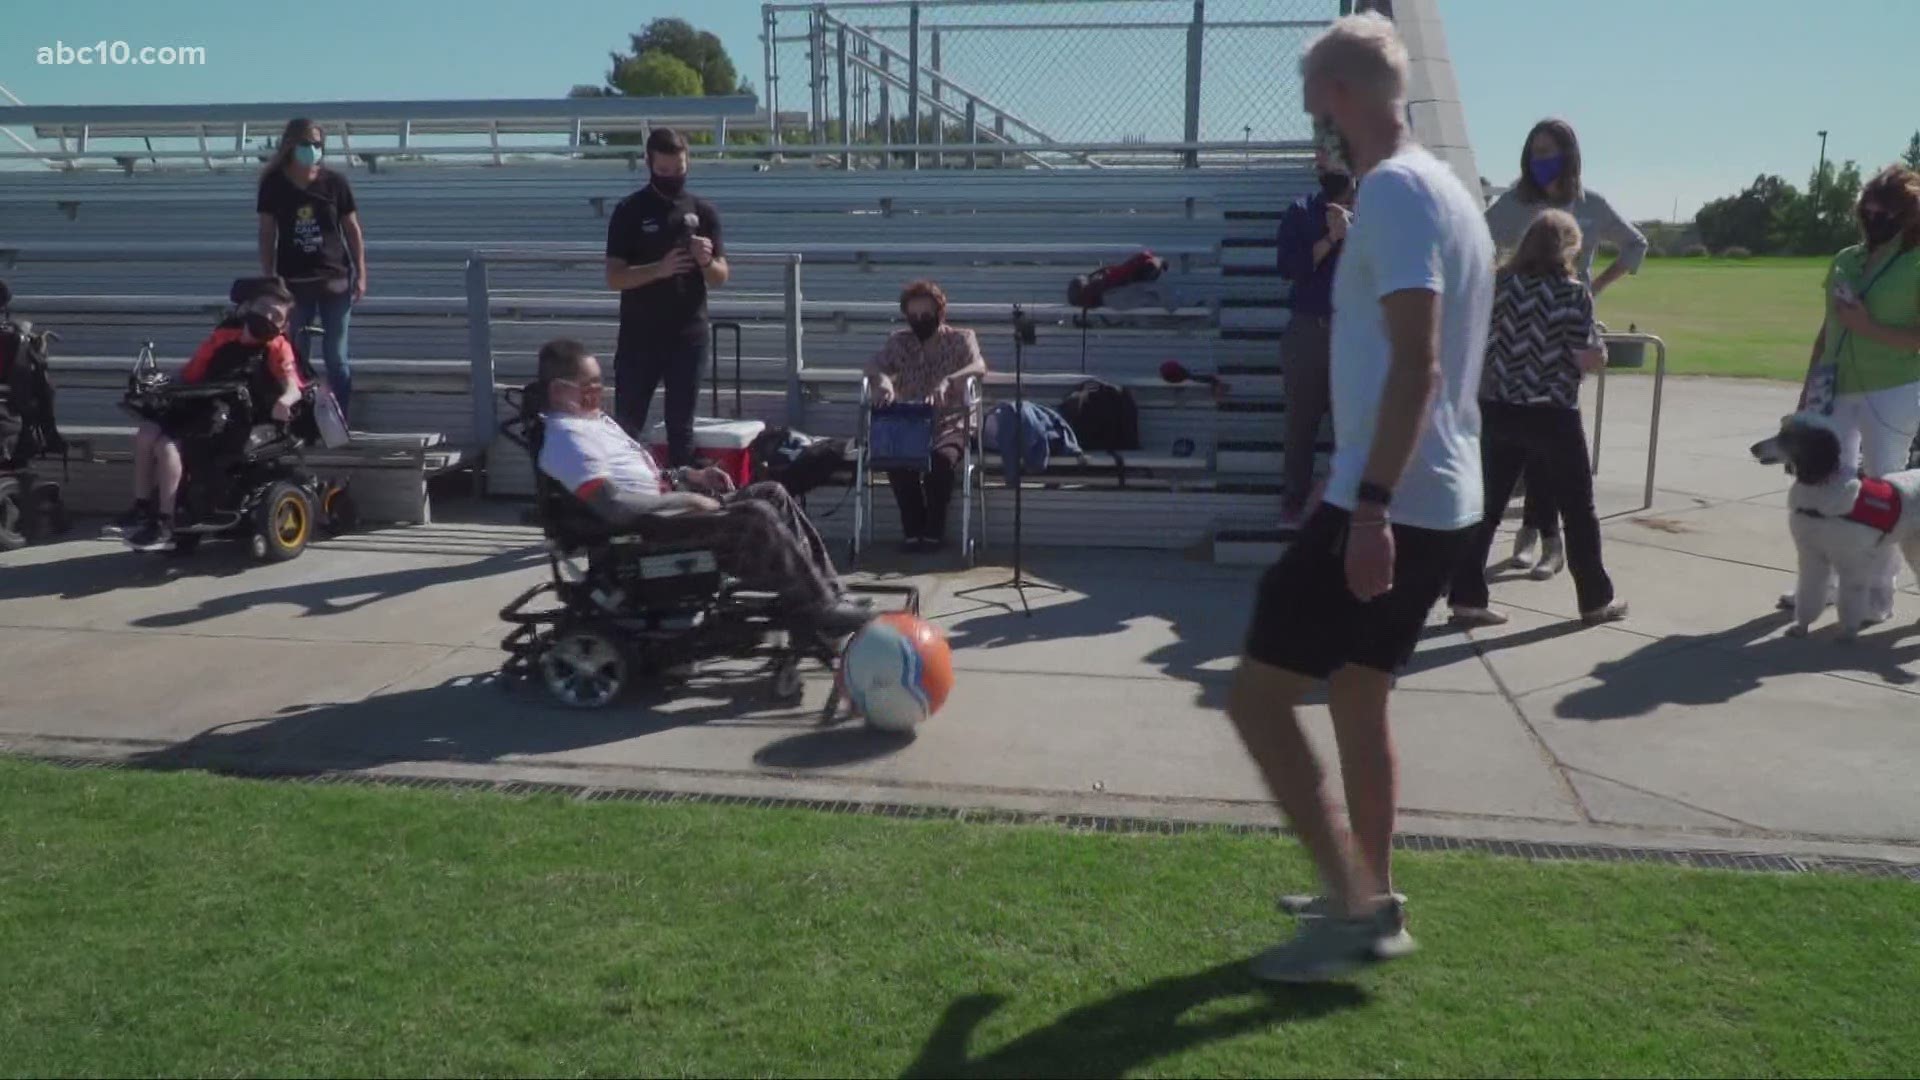 The Sacramento soccer team granted Michael Watson's wish and gifted him a brand new power wheelchair so he could play soccer again.